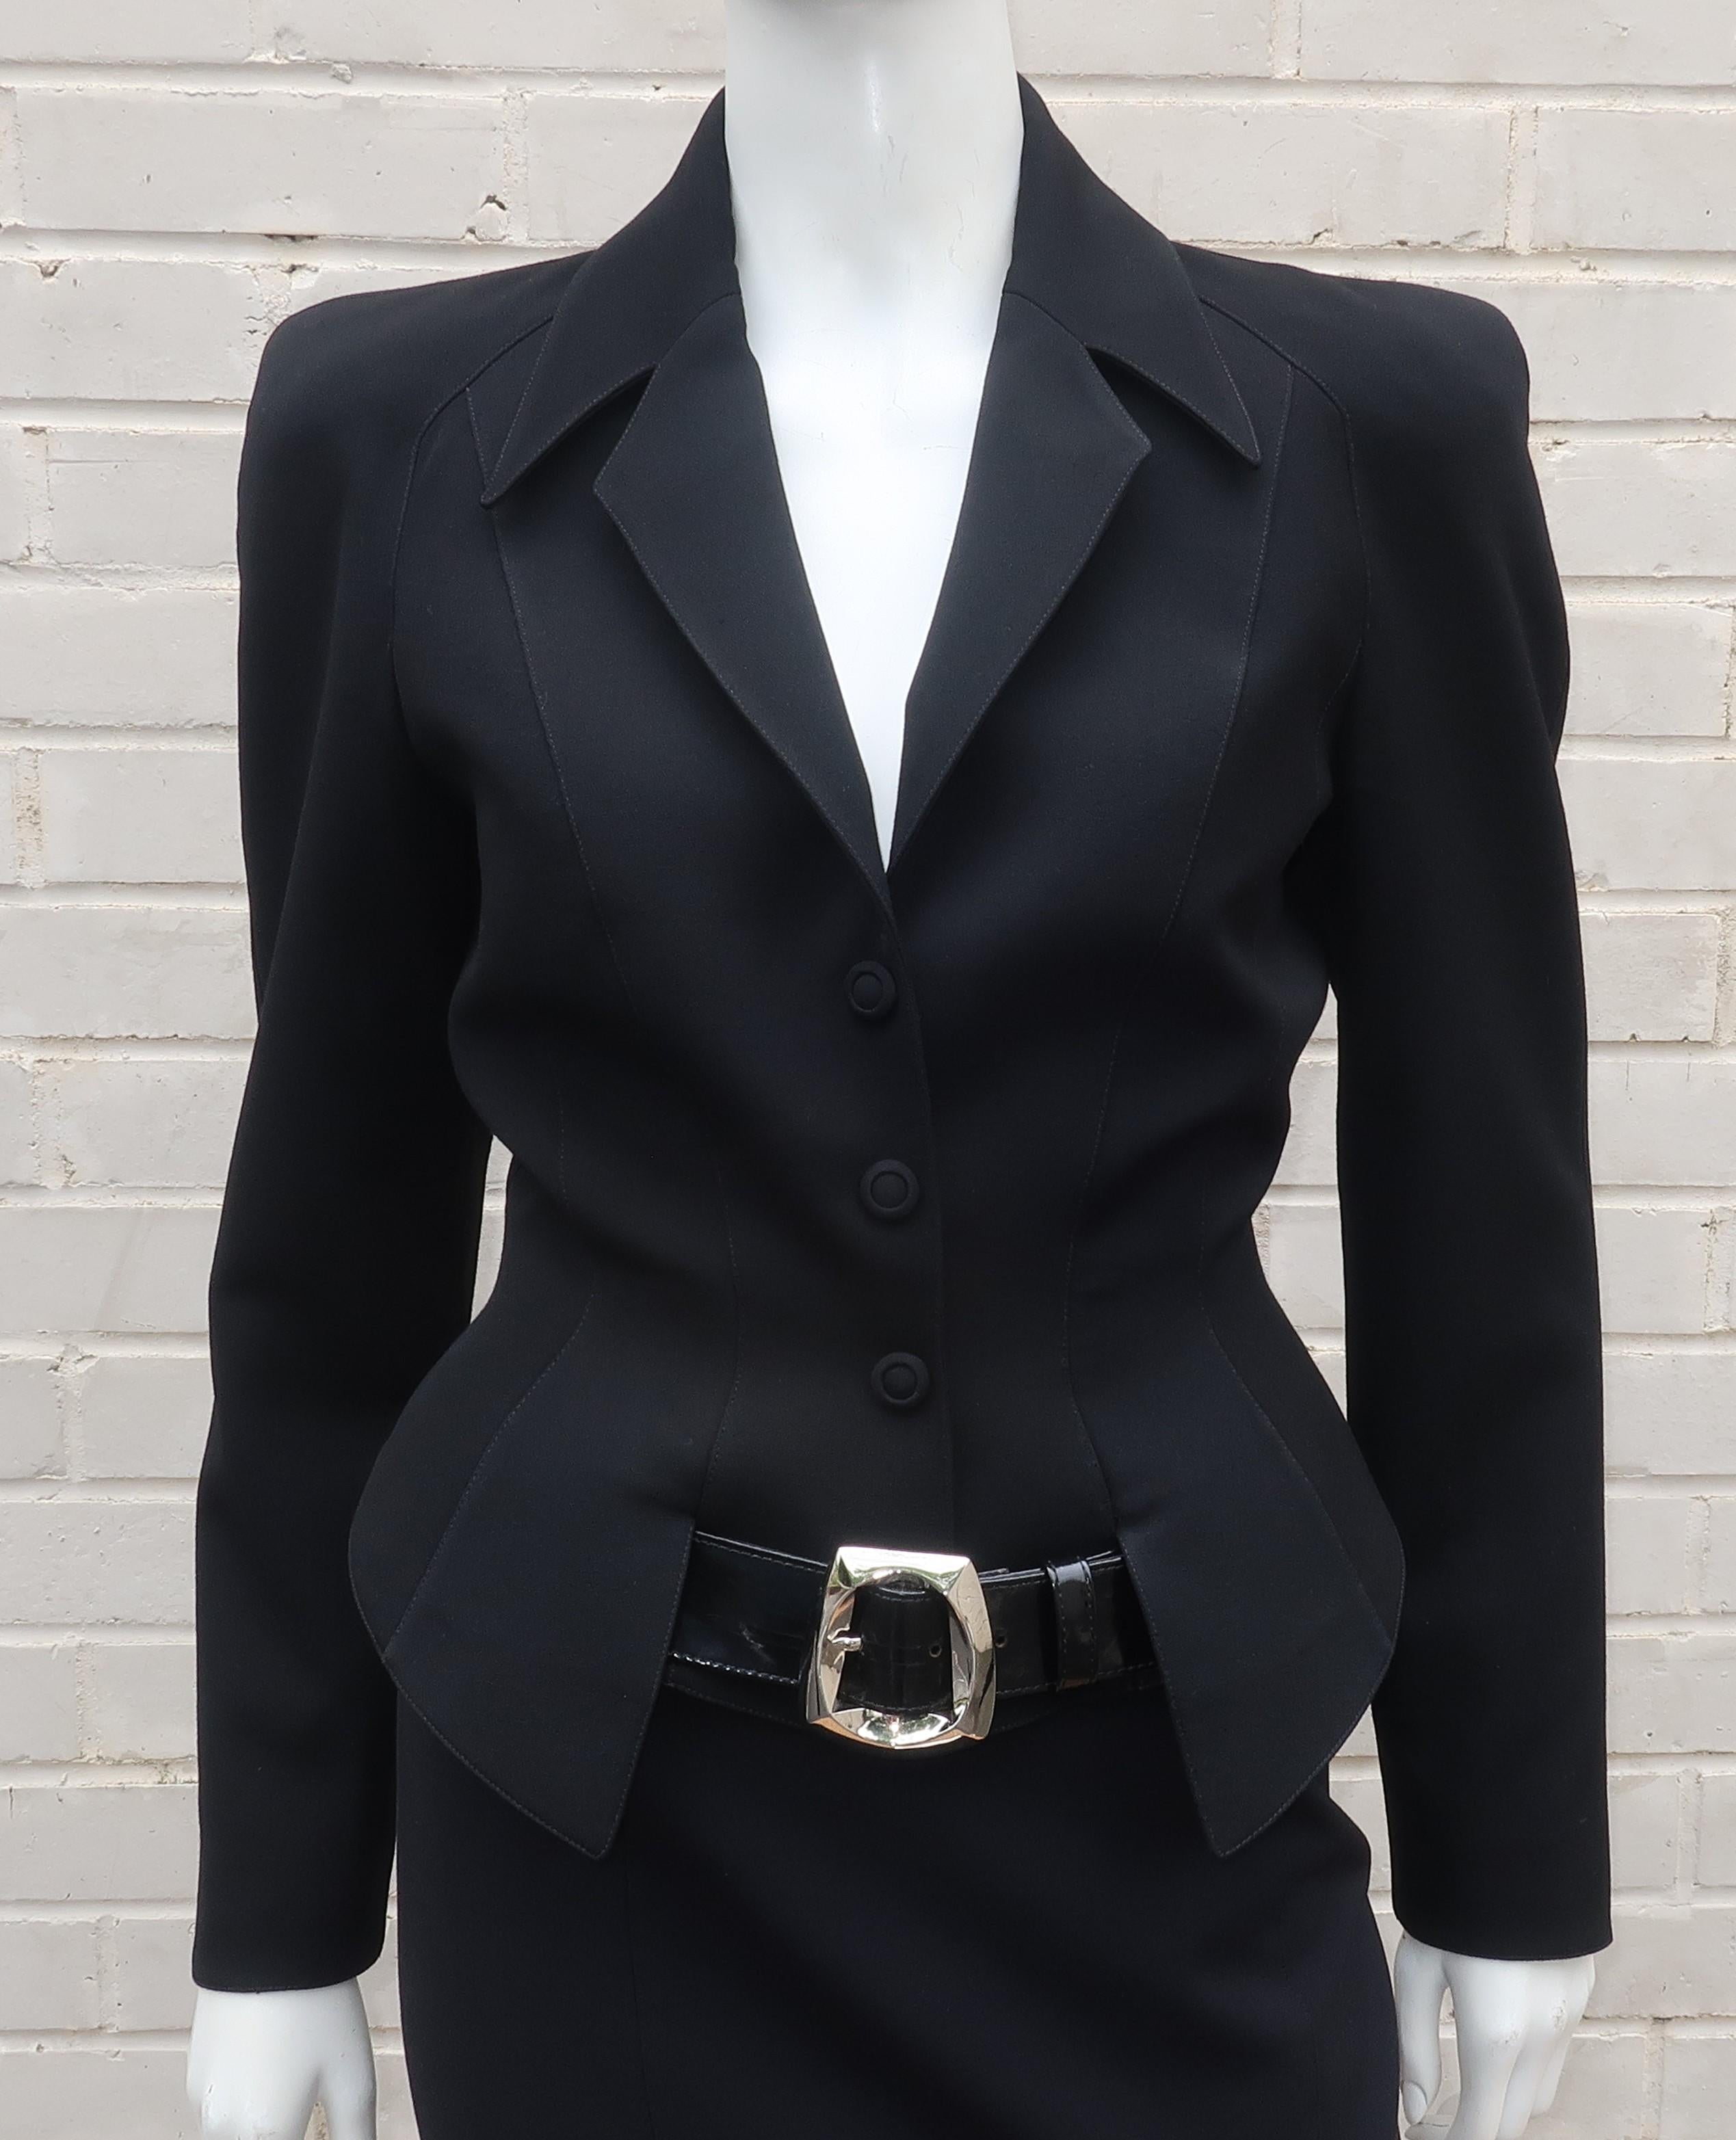 If Emma Peel owned a Thierry Mugler suit ... this would be it!  This two piece skirt suit is a body conscious design with nips, buckles and zippers in all the right places.  The jacket is a classic Mugler look with faux buttons, snap closures,